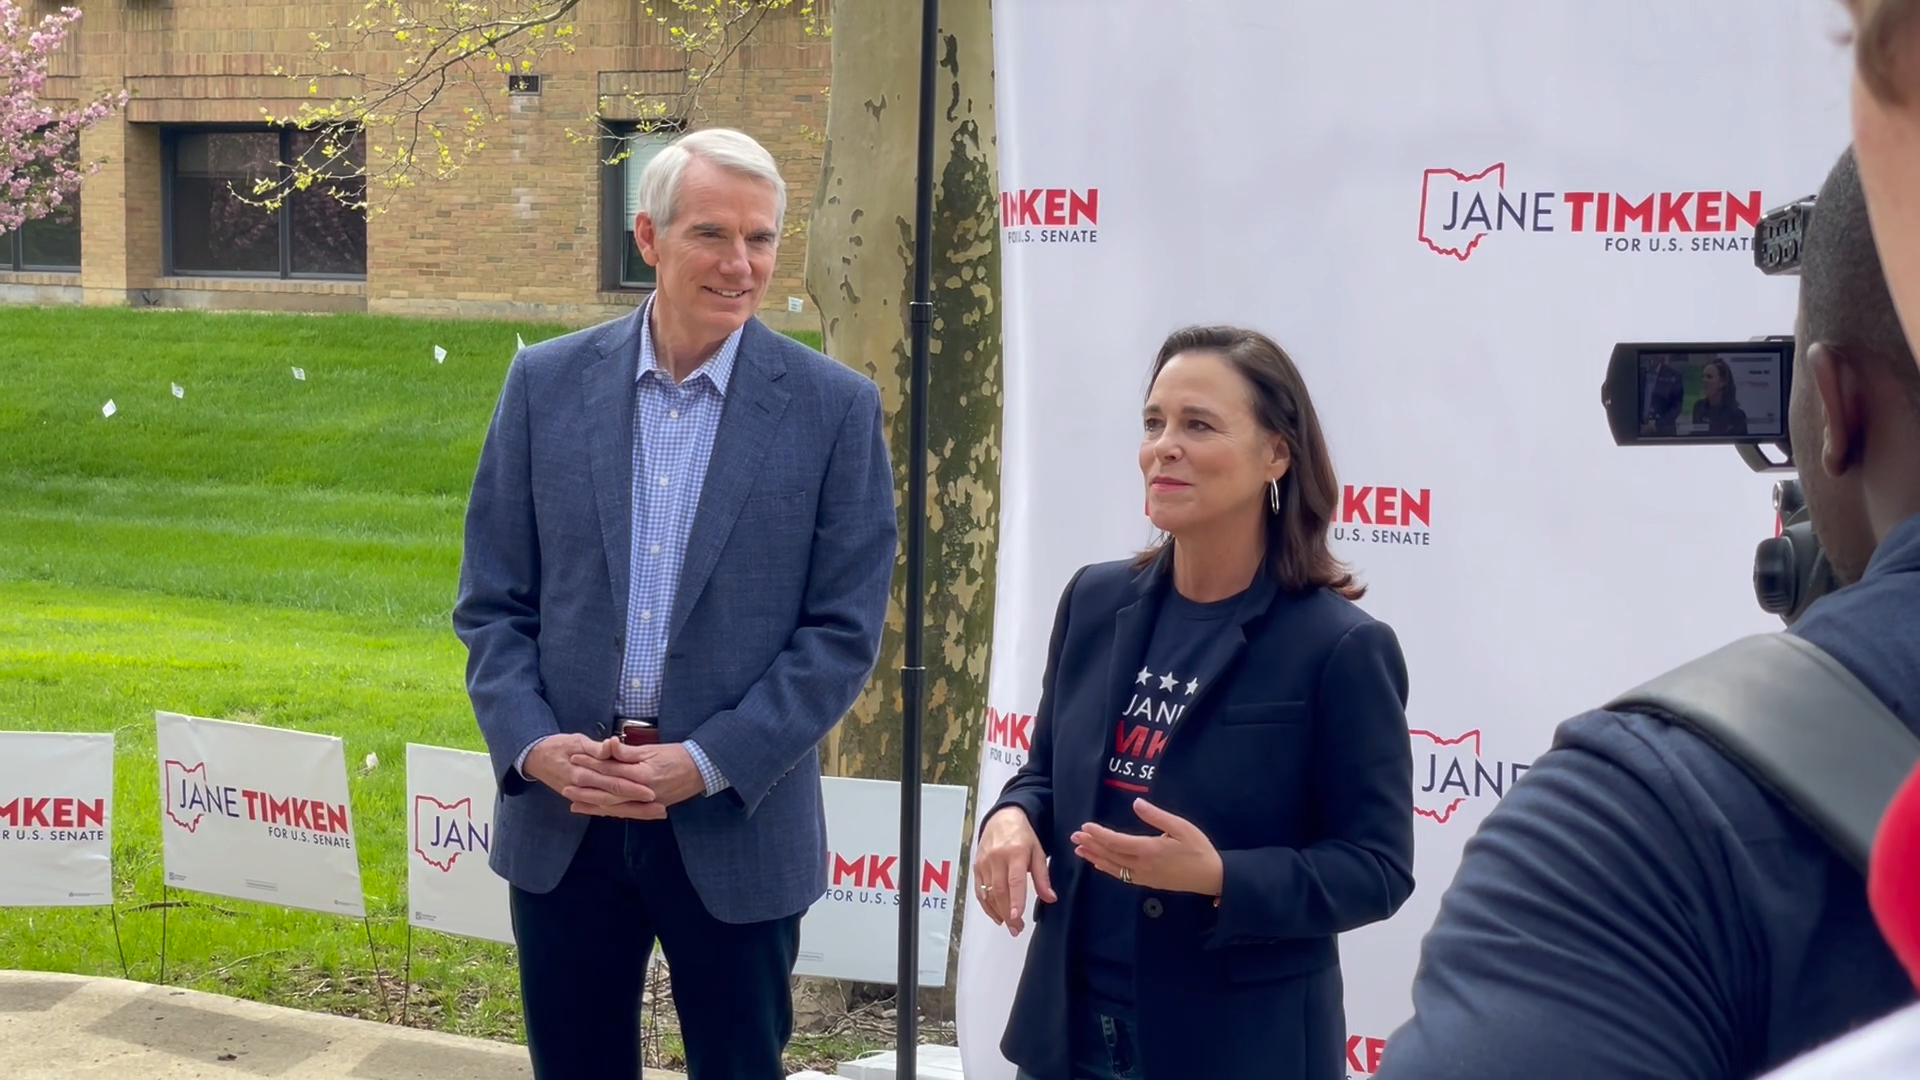 Ohio GOP Senate Primary: Timken plans ground game blitz to get undecided voters on her side